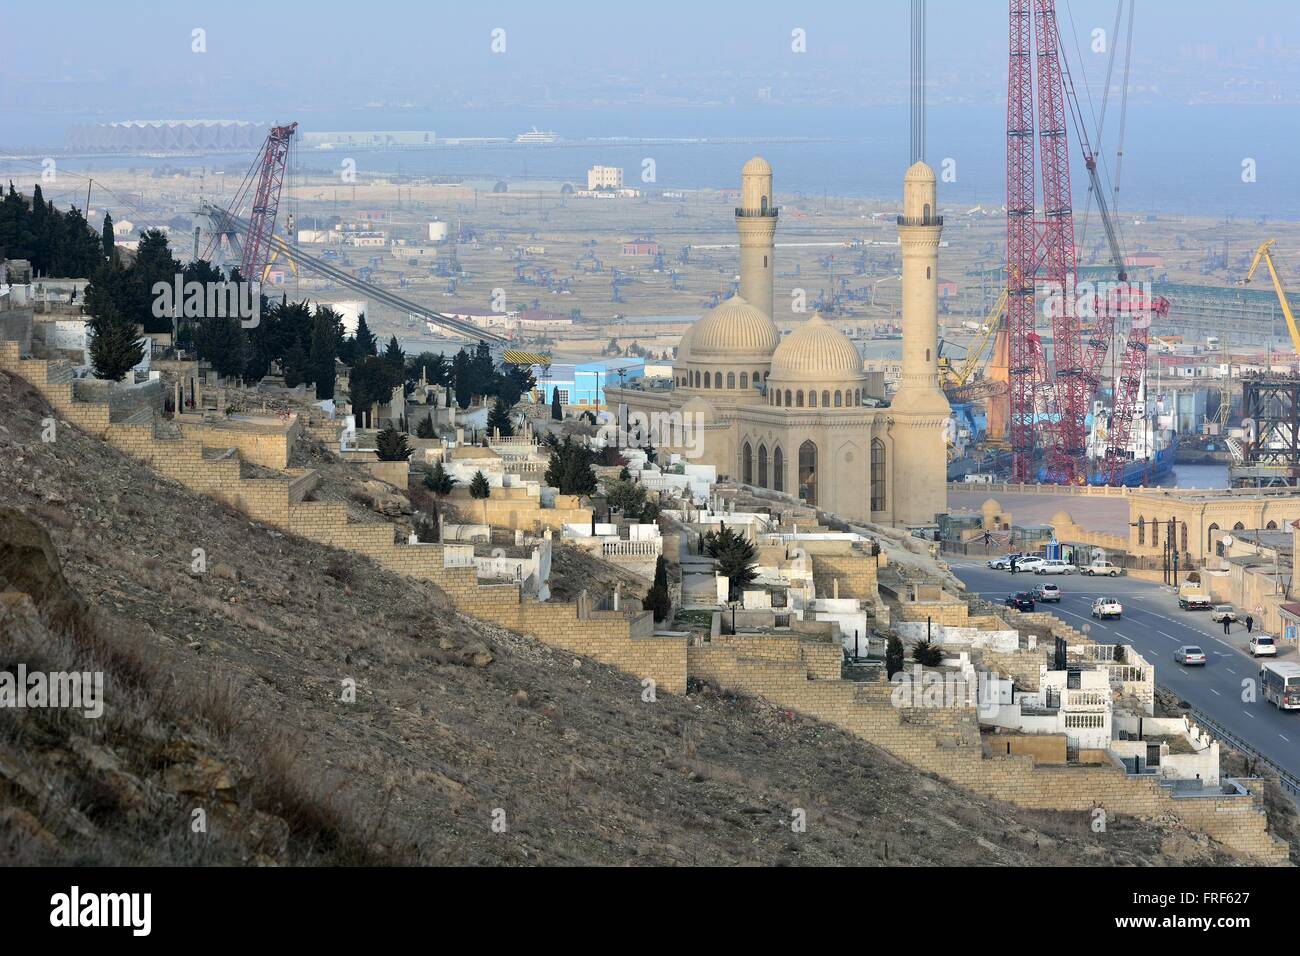 Bibi-heybat Mosque, with the shipyard, Bayil oil field and graveyard. Azerbaijan's most significant mosque, on the Caspian coast Stock Photo